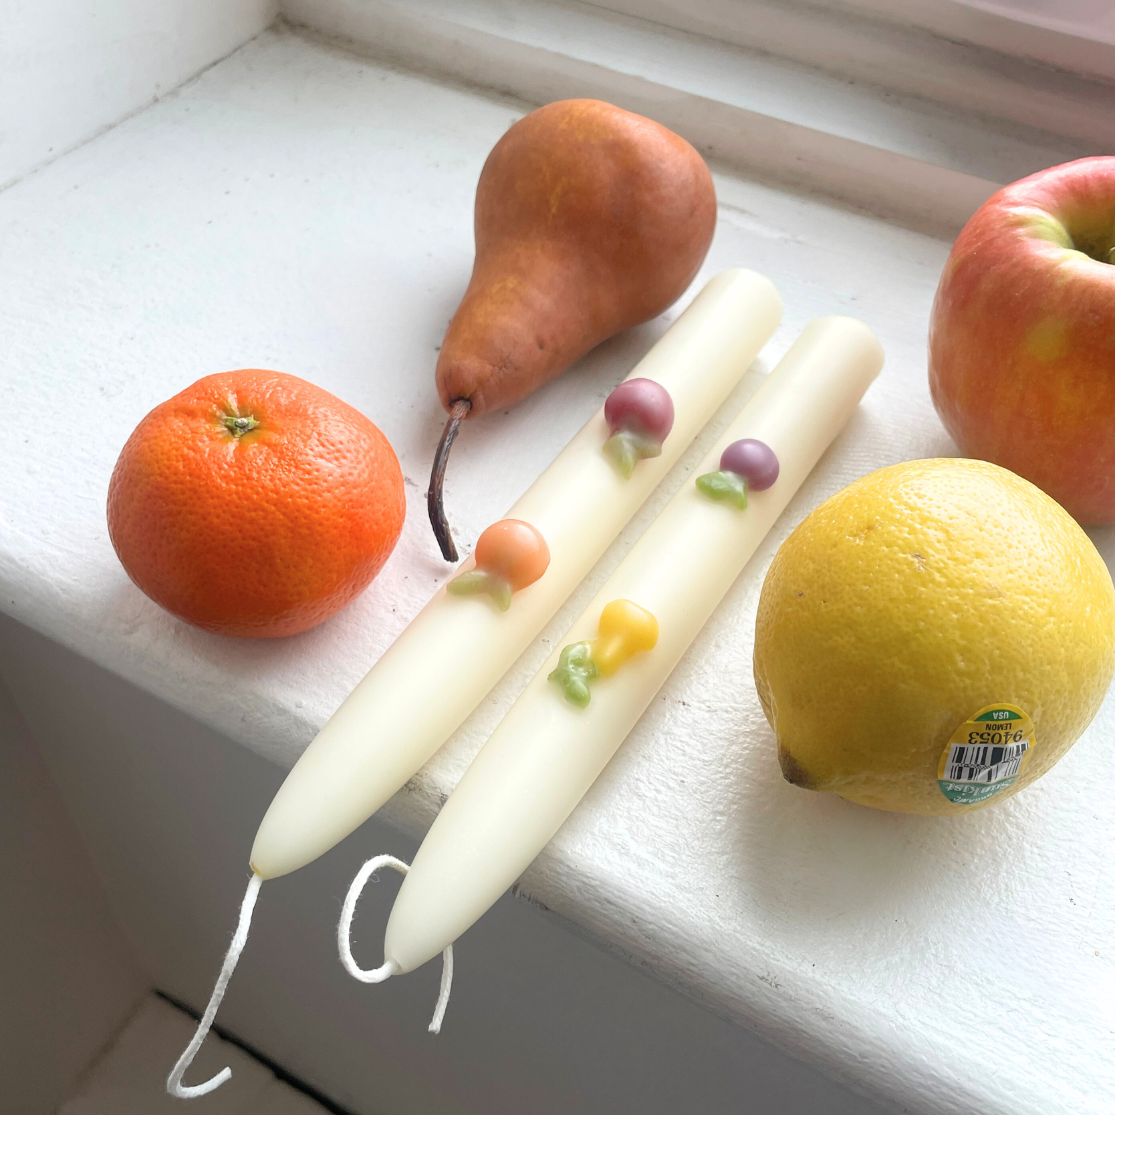 Fruit Beeswax Tapers - Pair of 2 // Tapers, Fruit, Candles, Food Candles, Beeswax, Fruit Salad